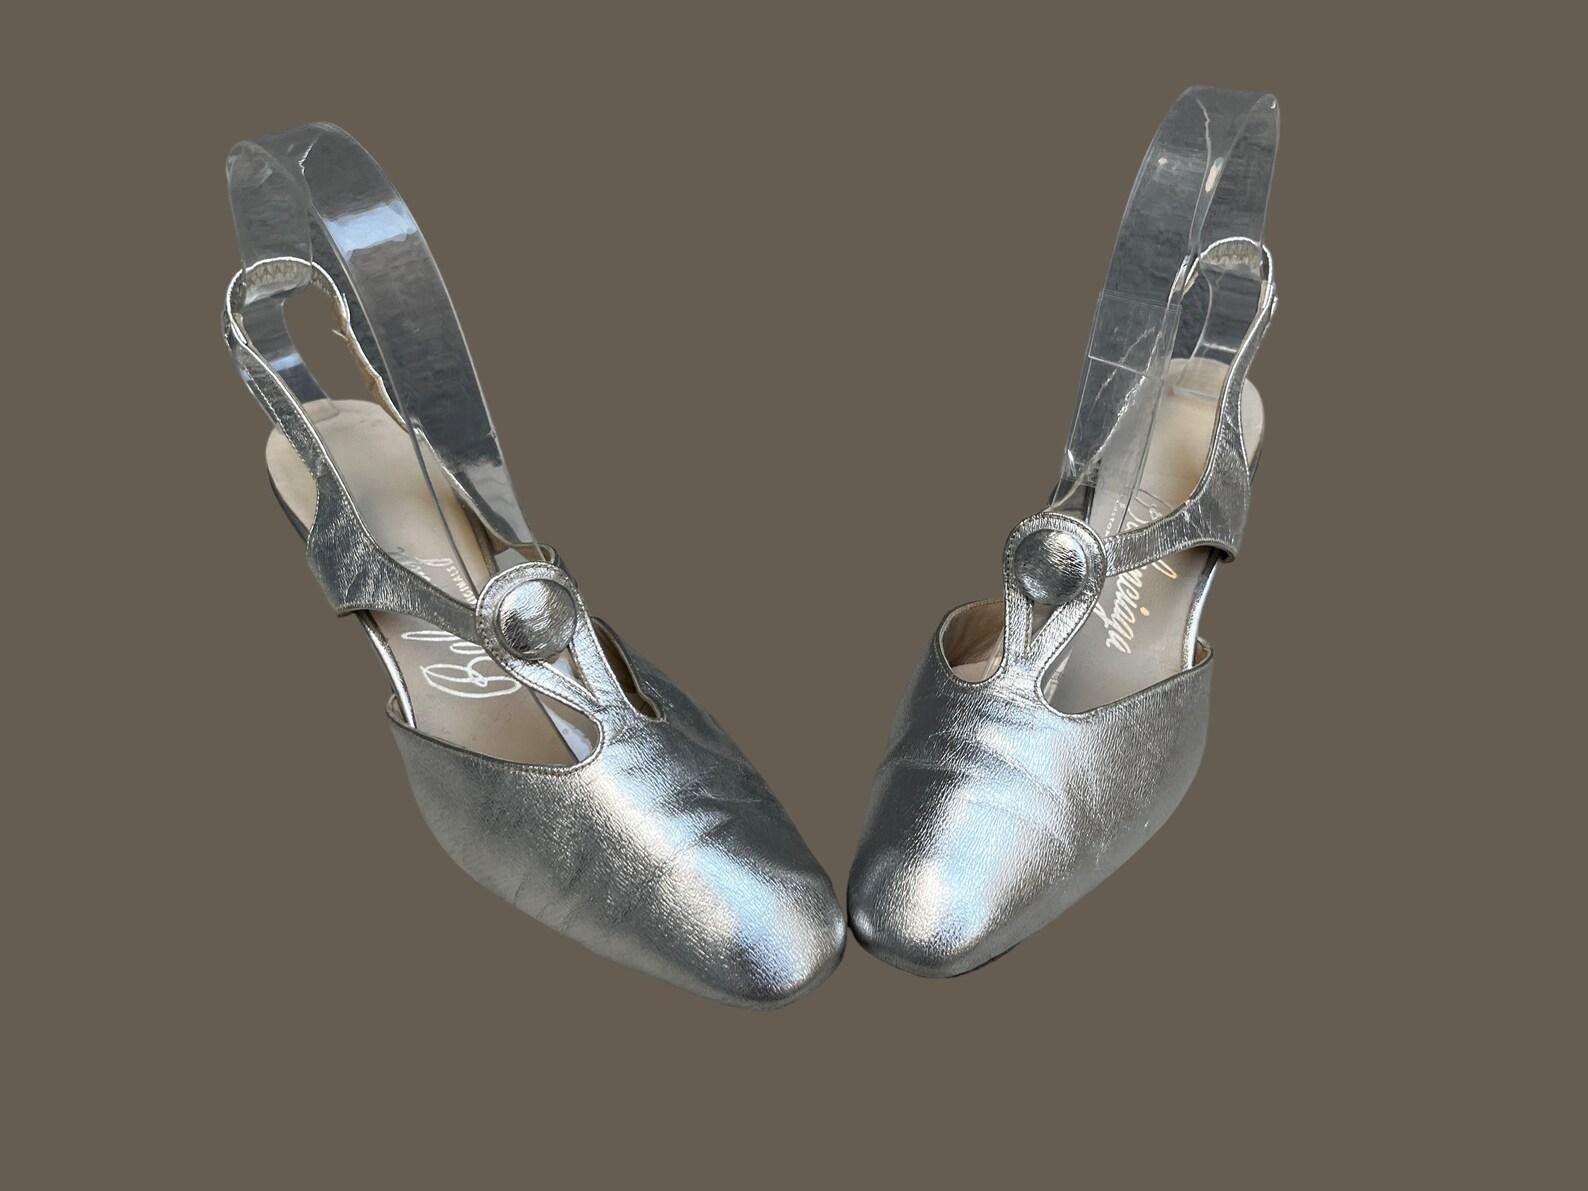 Beautiful & rare Balenciaga silver leather slingback kitten heels. 
Cut-out vamp with a decorative button at the center. 
Handmade leather.

★ An amazing piece of fashion history!

Circa 1960s
Balenciaga
Custom Originals
Marked Size